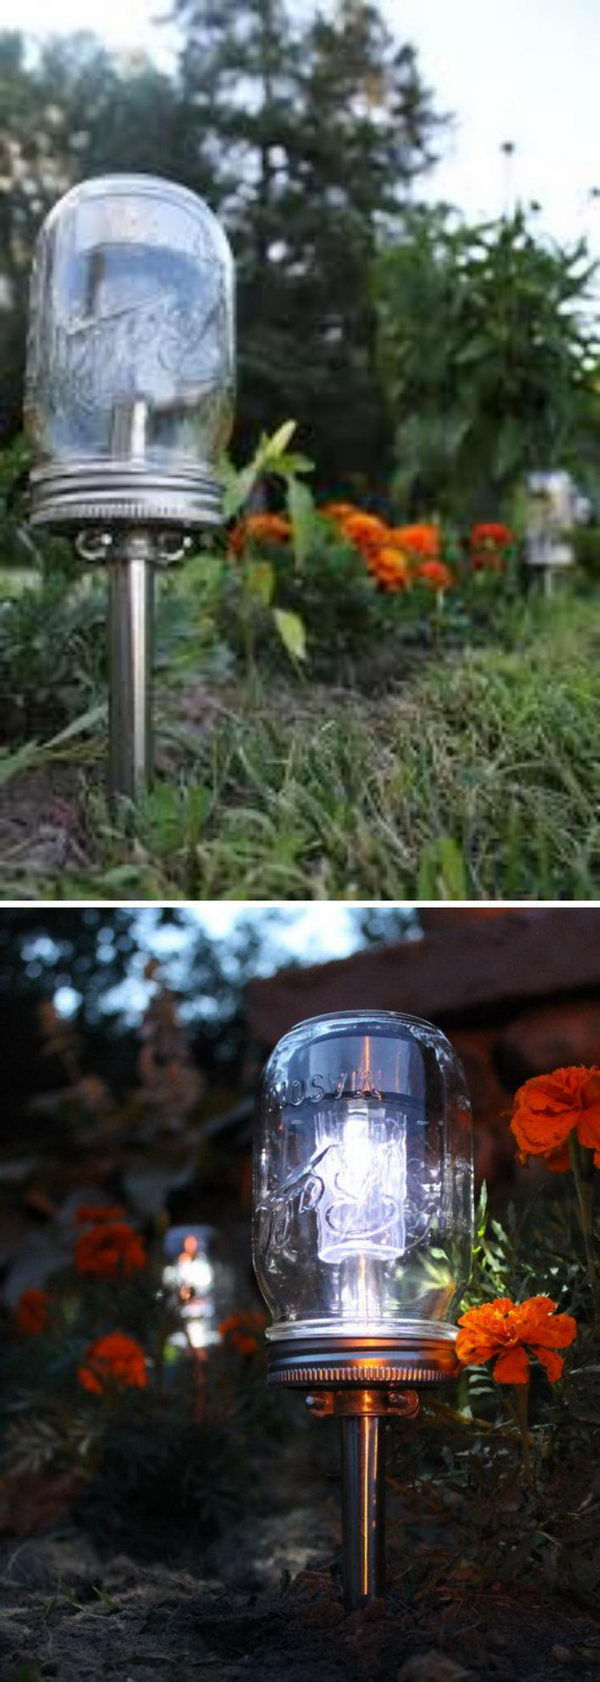 DIY Outdoor Lighting
 30 Cheap And Easy DIY Lighting Ideas for Outdoor 2017